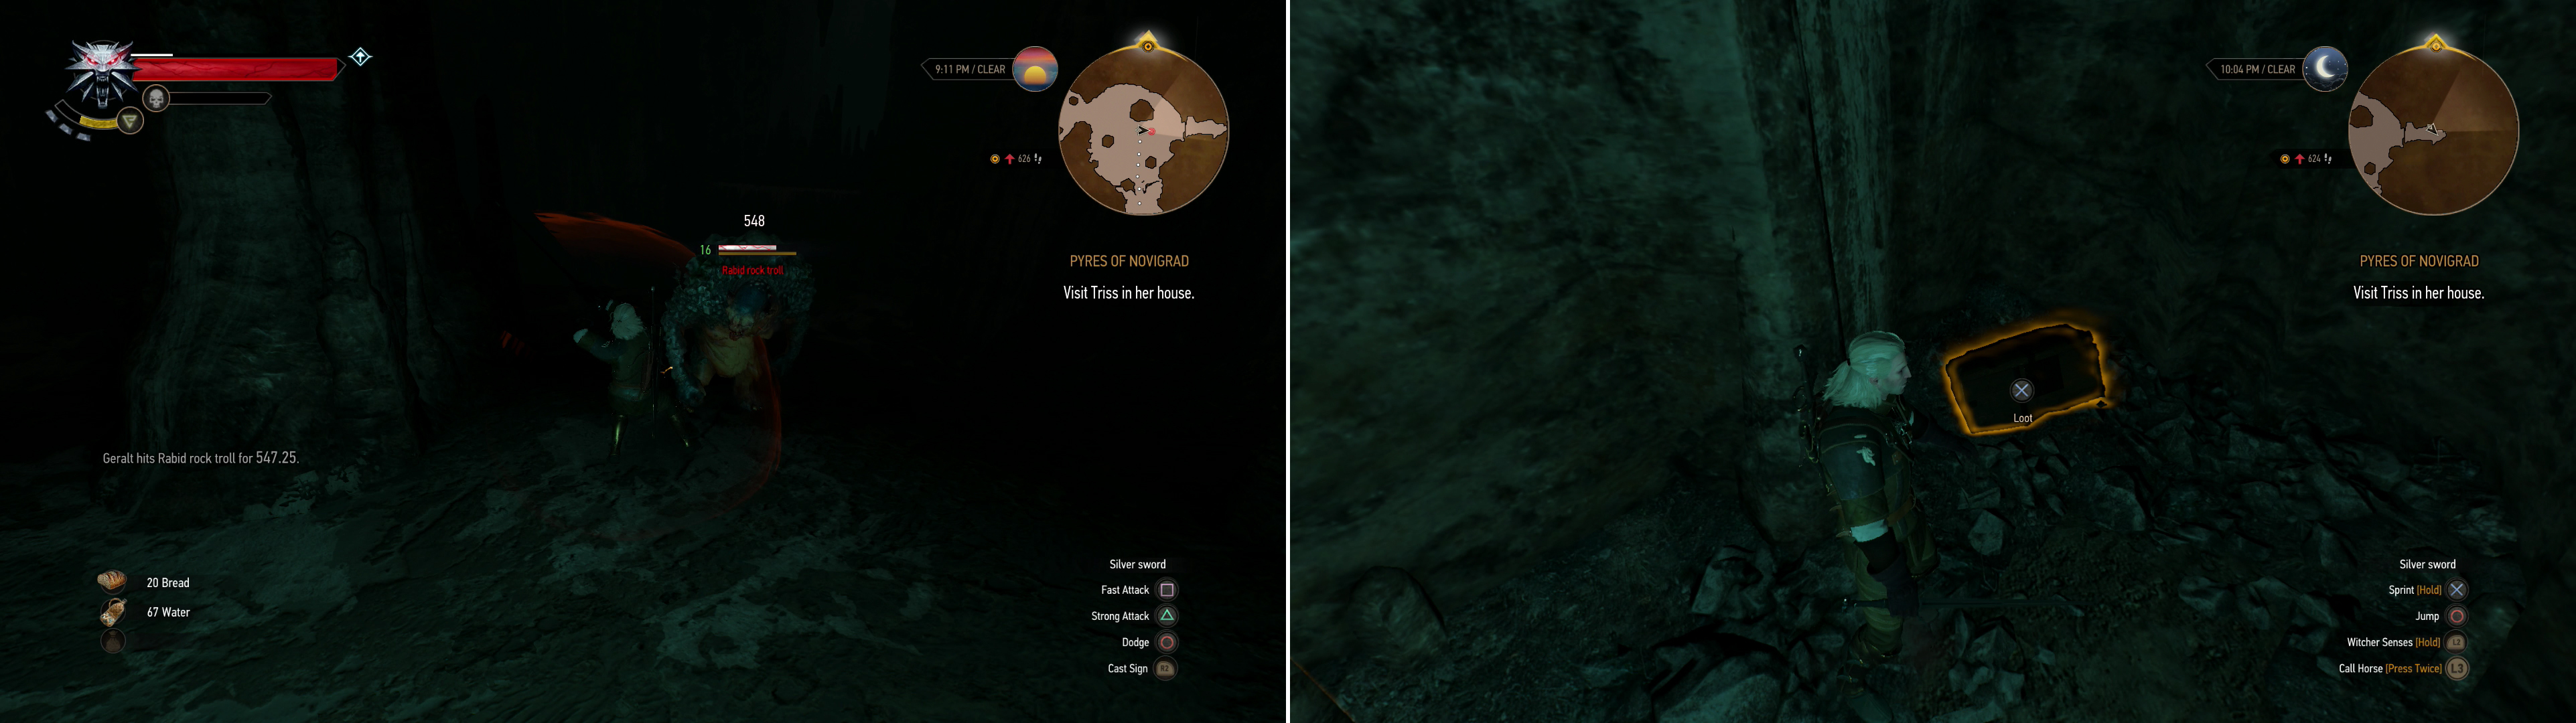 Defeat the Nekkers and the Rock Troll (left) then claim the treasures hidden in their cave (right).